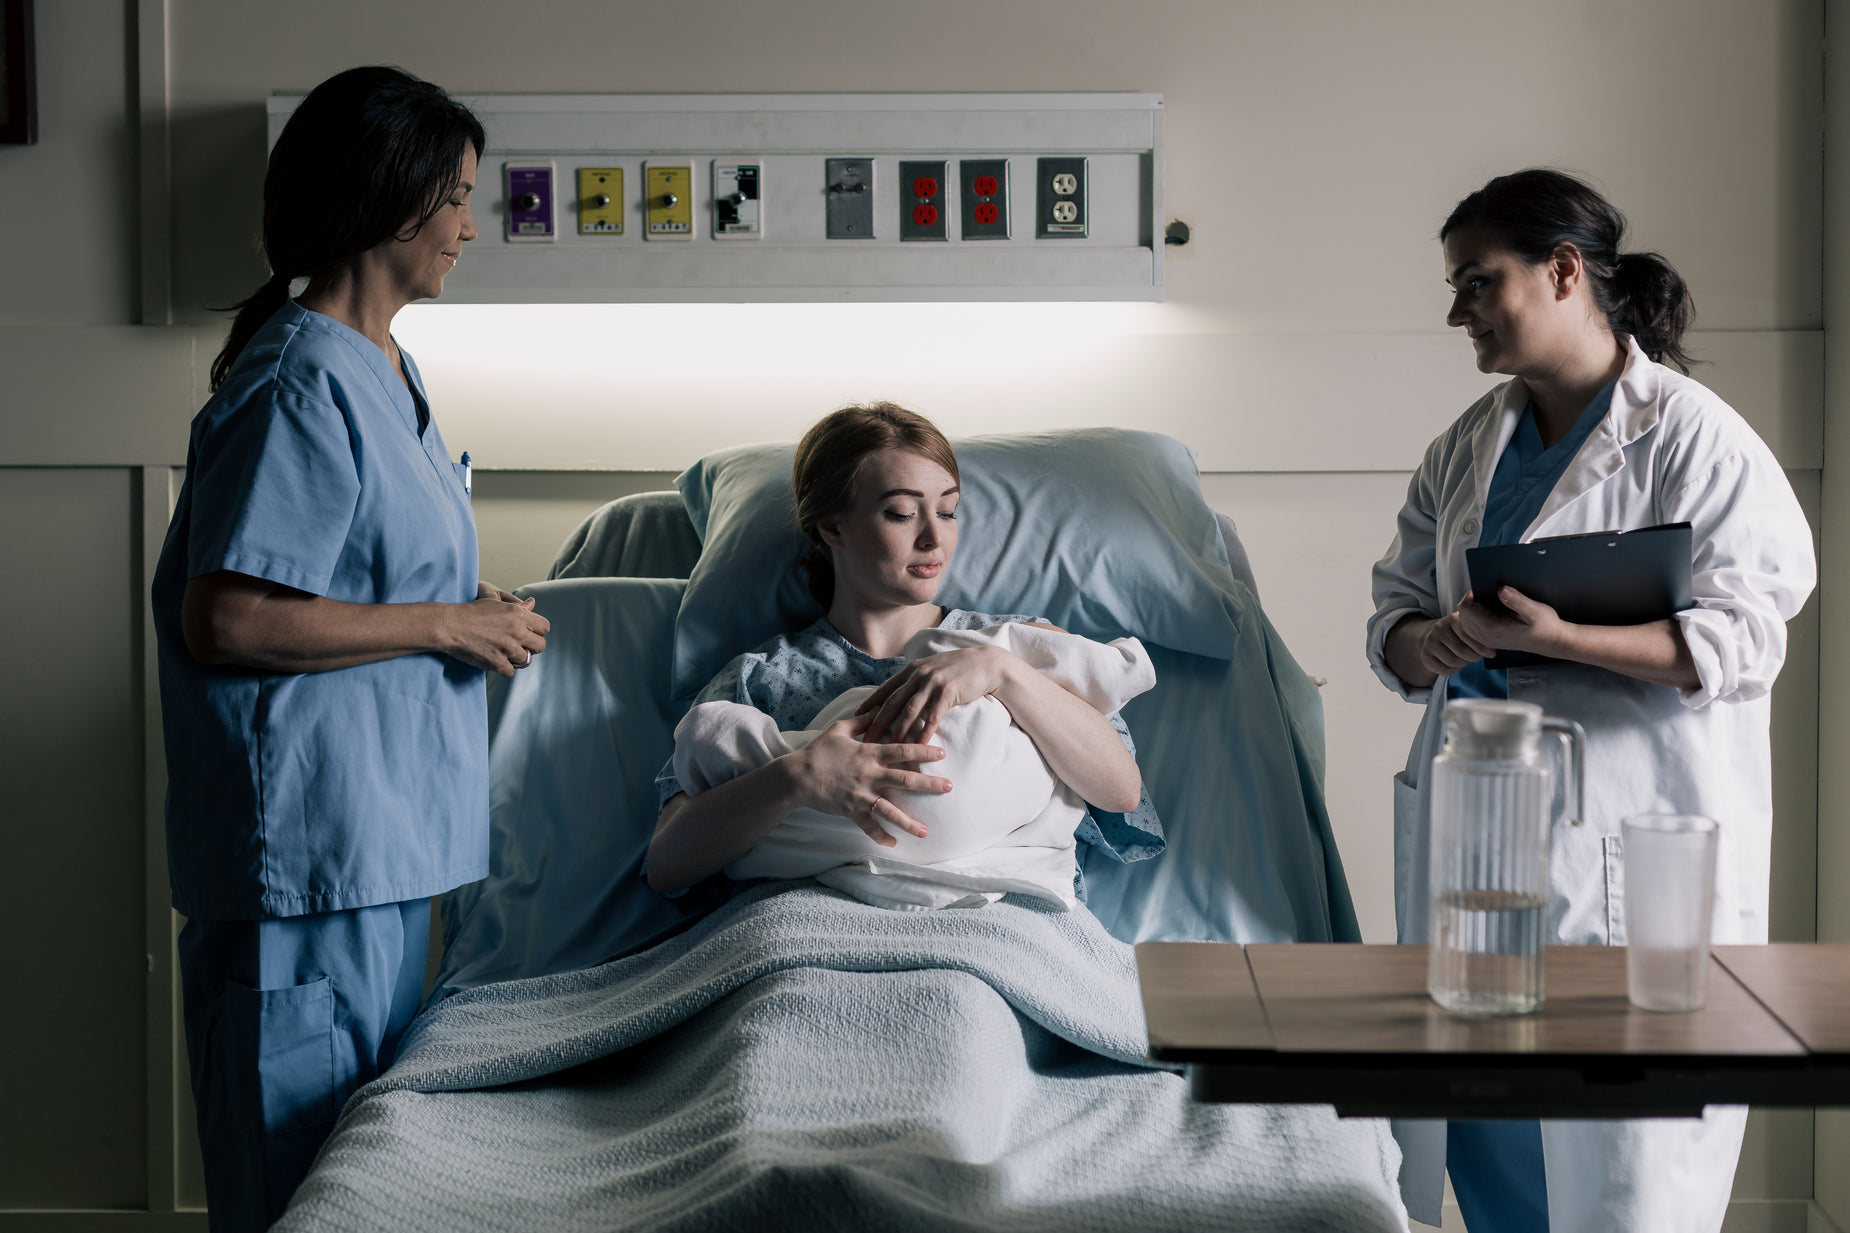 a hospital bed scene with two women and one woman with ivs